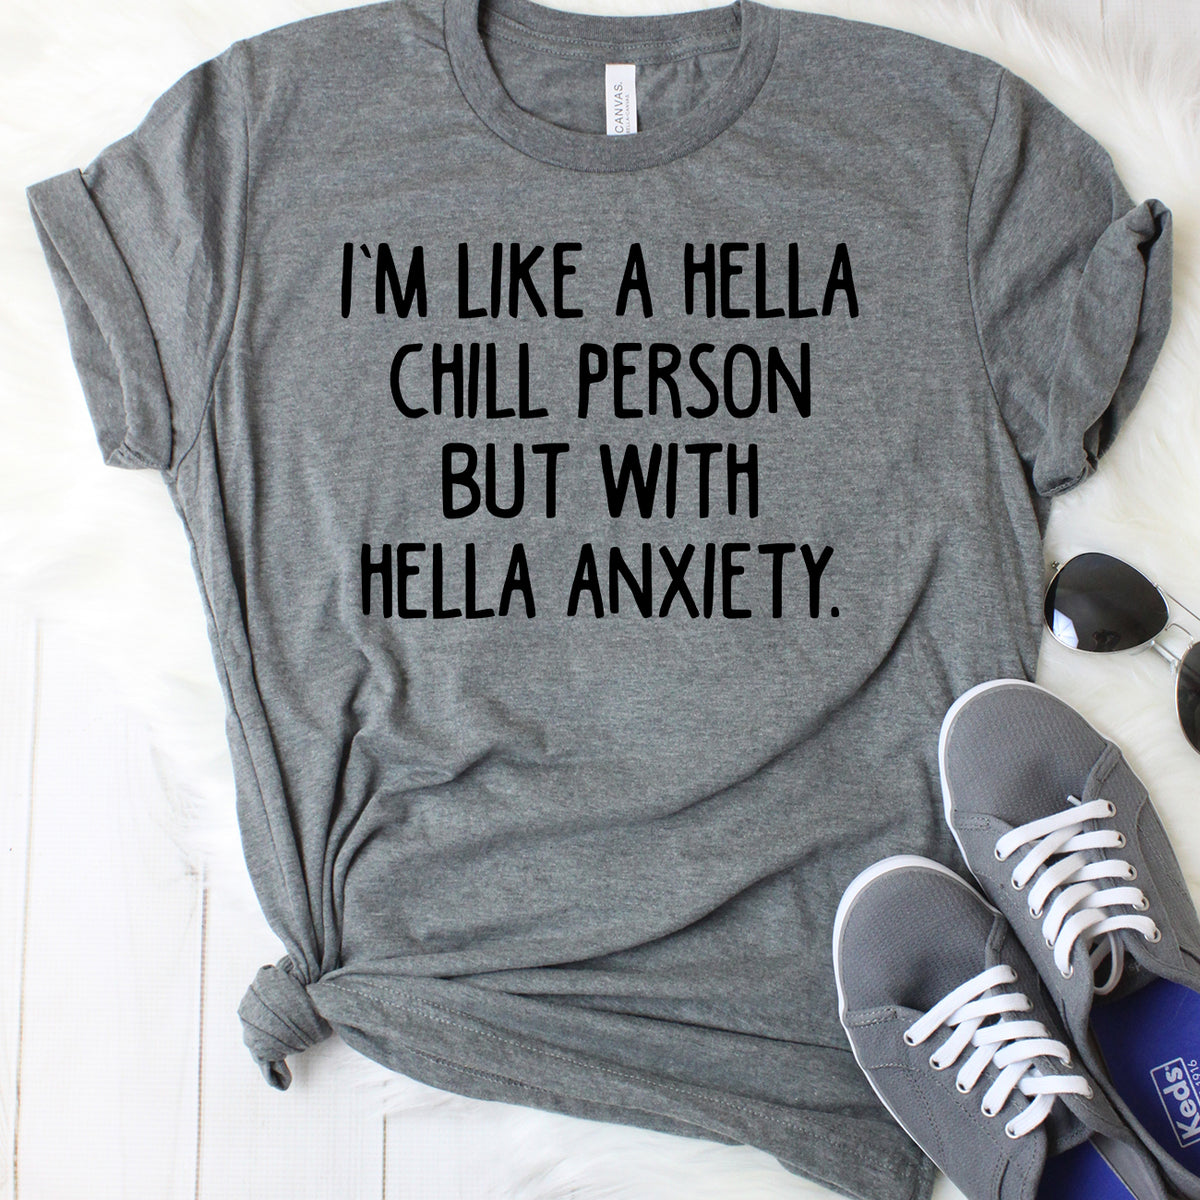 I'm Like a Hella Chill Person But With Hella Anxiety T-Shirt